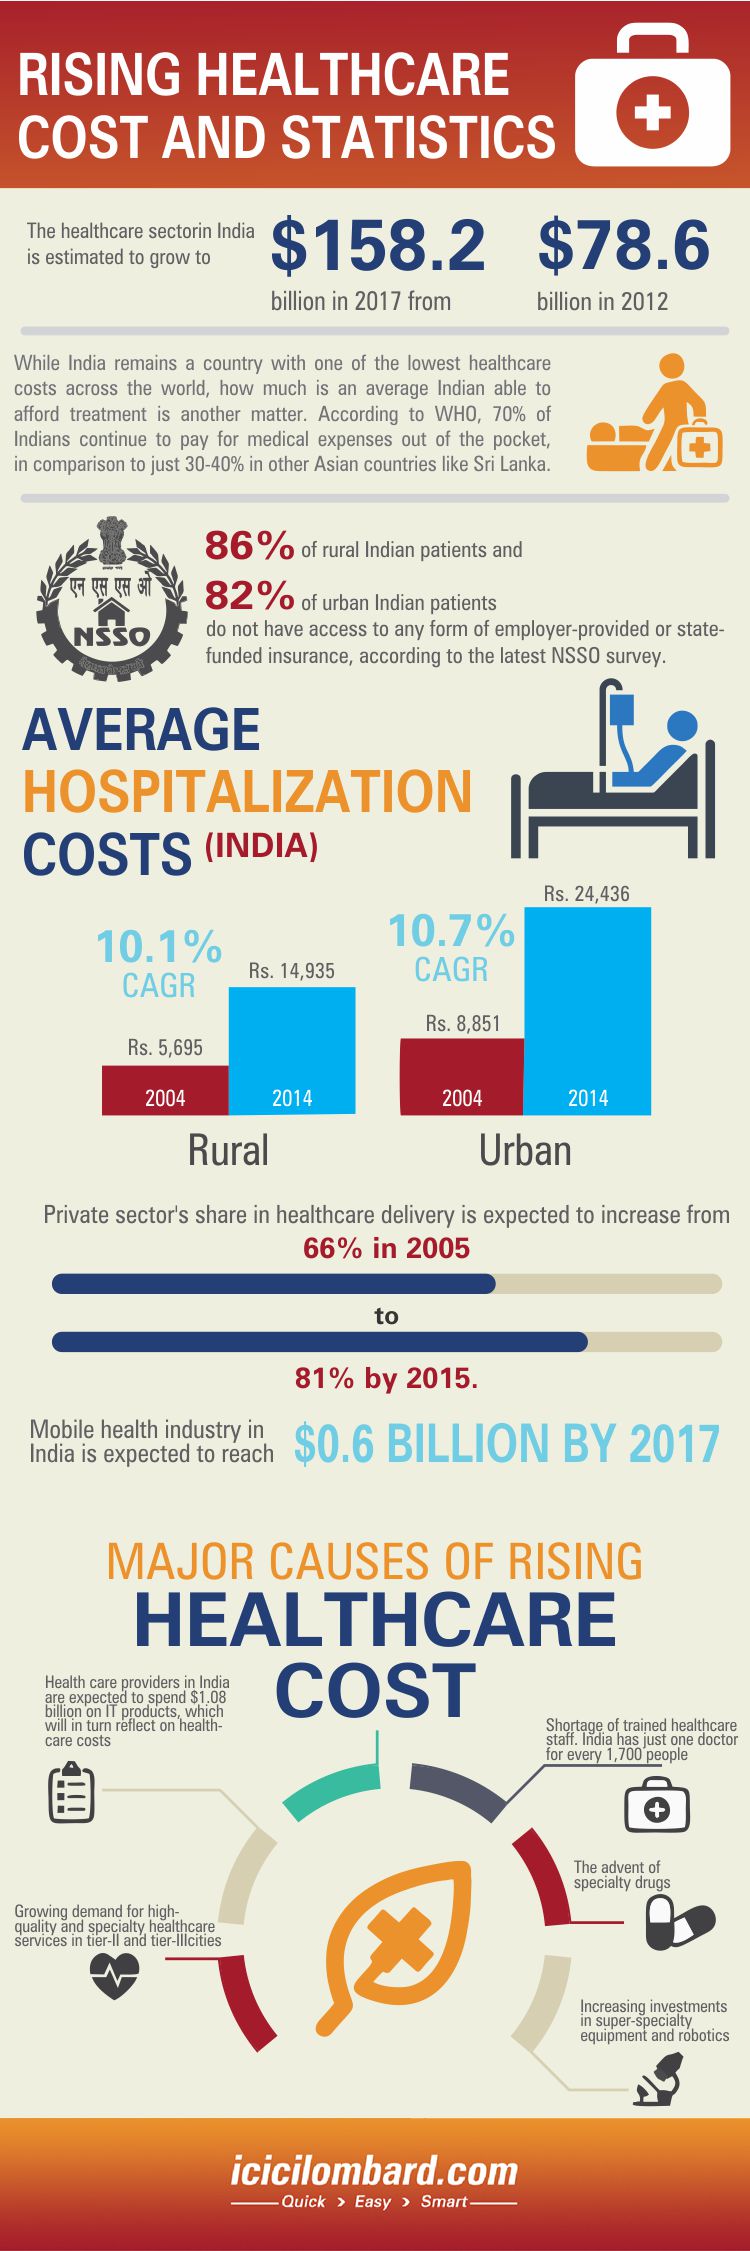 20151118-rising-healthcare-cost-and-statistics